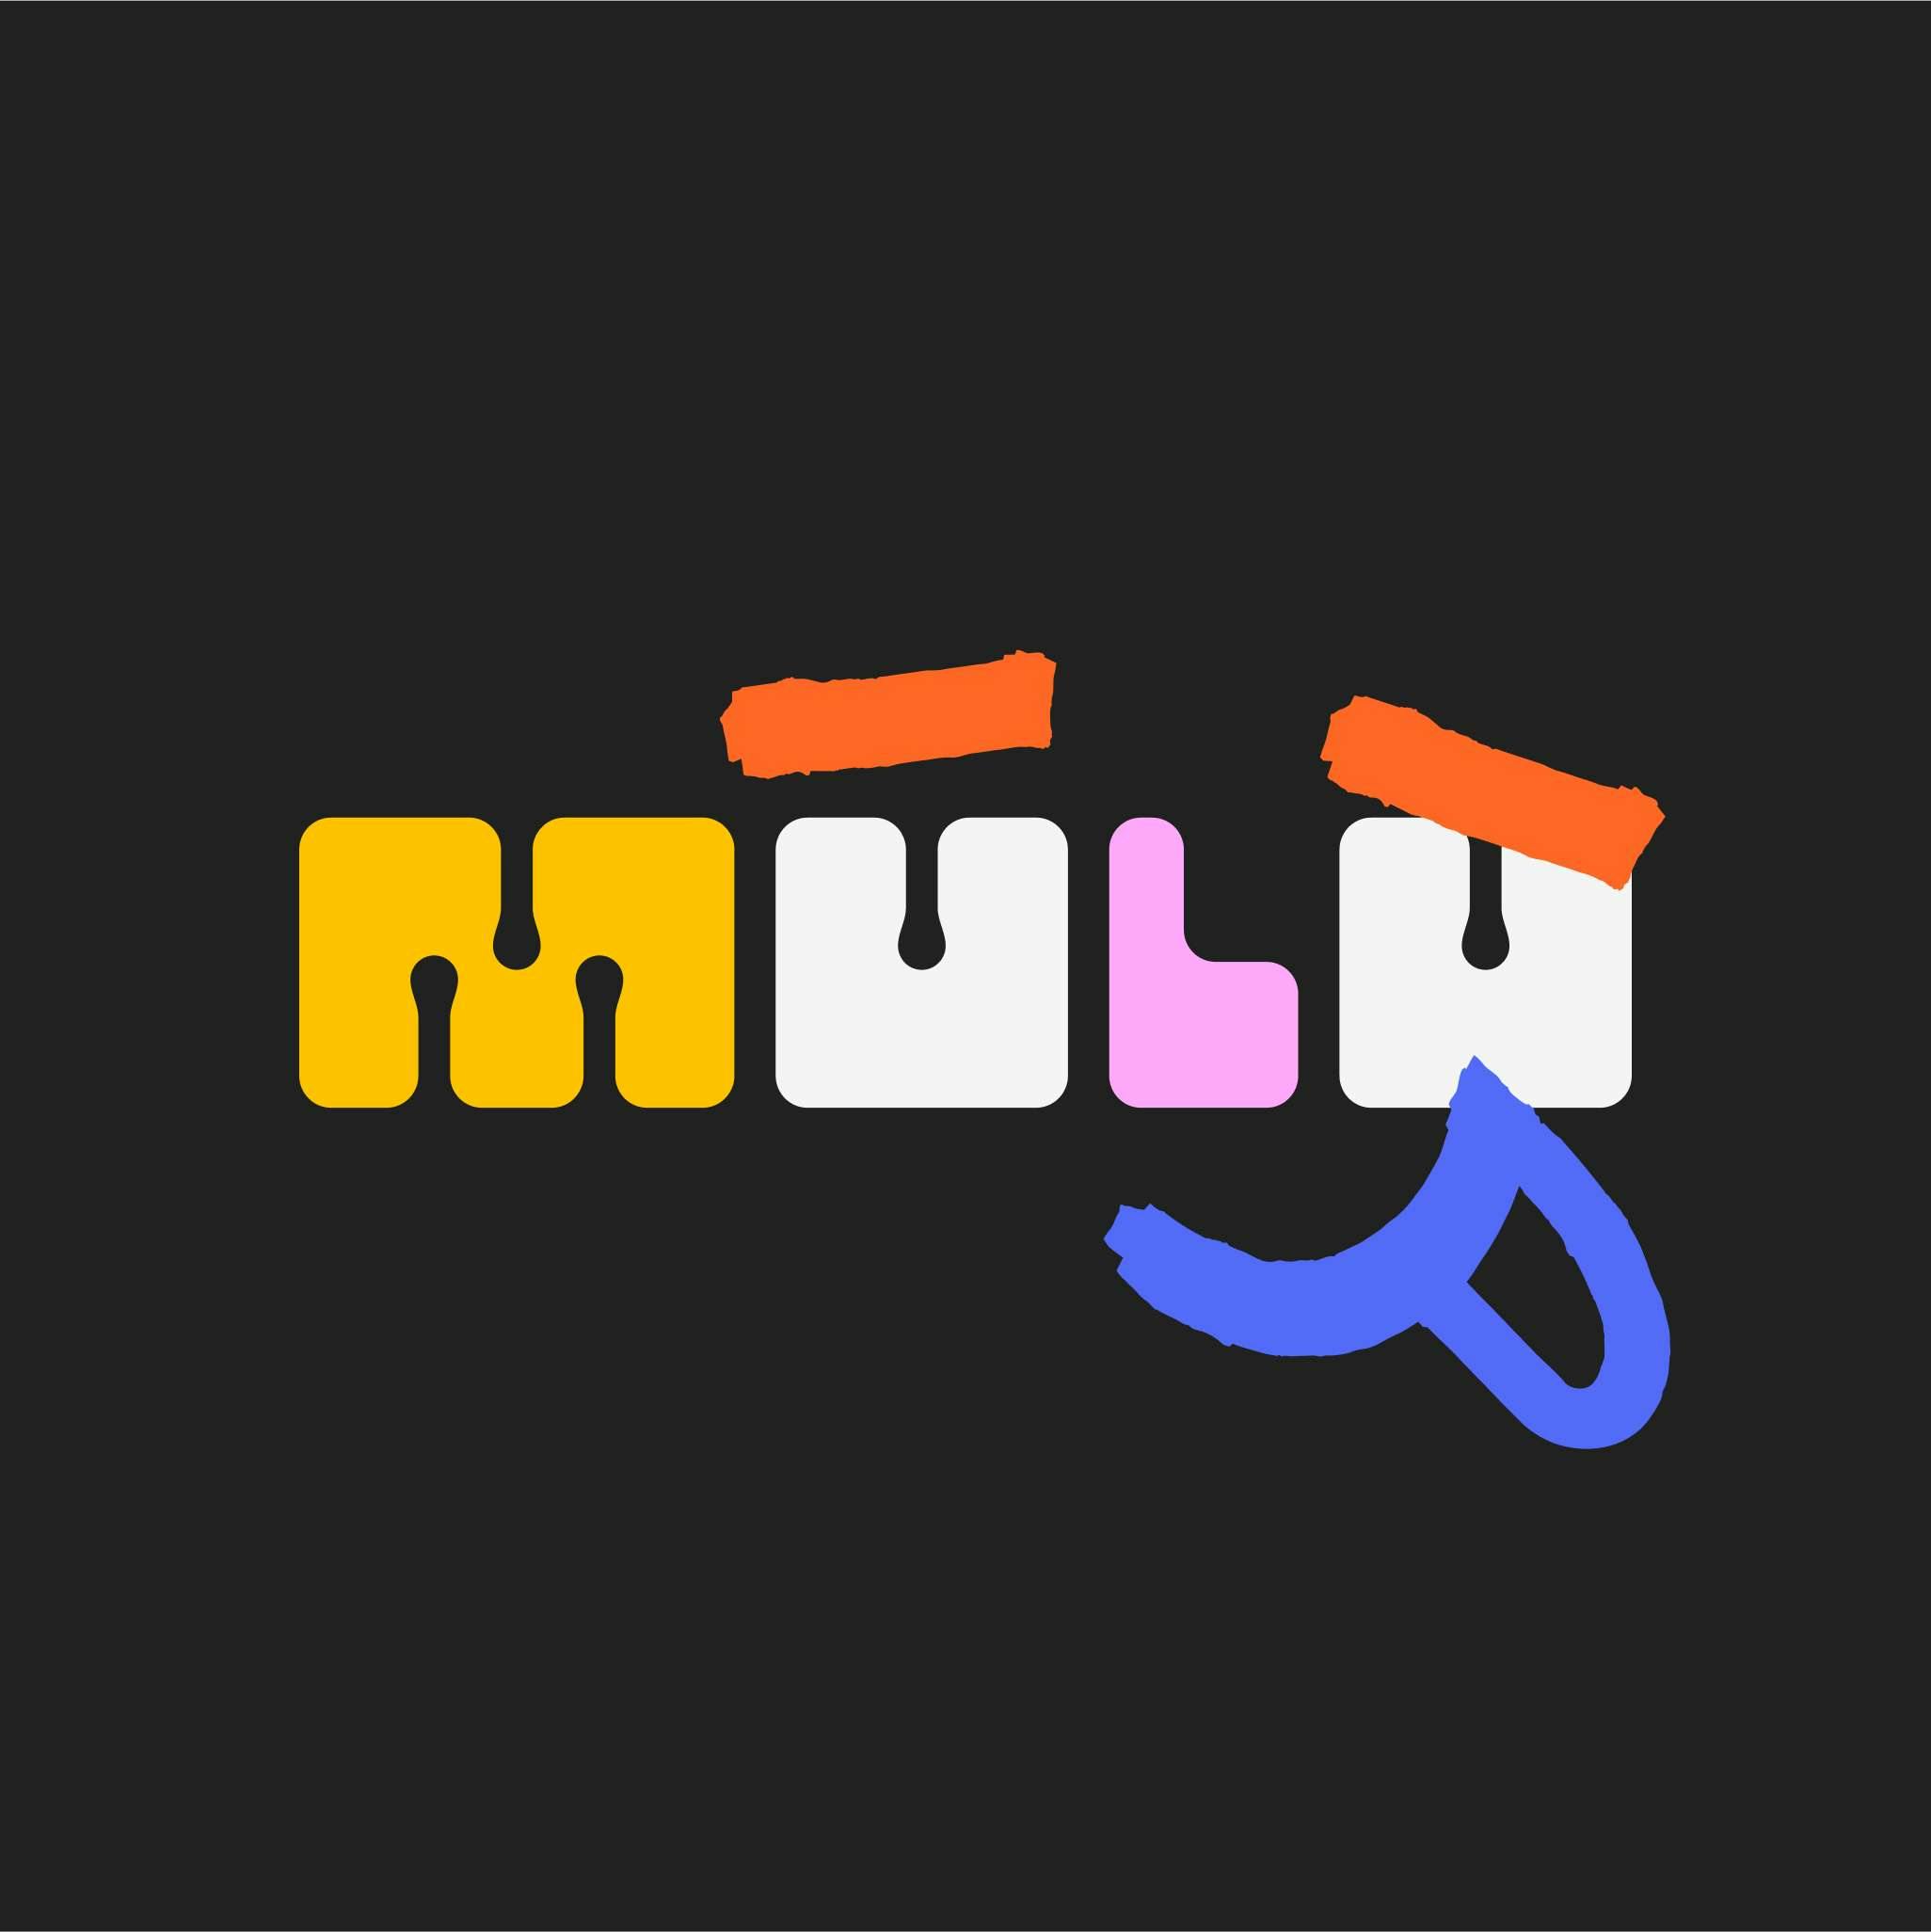 Mulu logo with face graphic